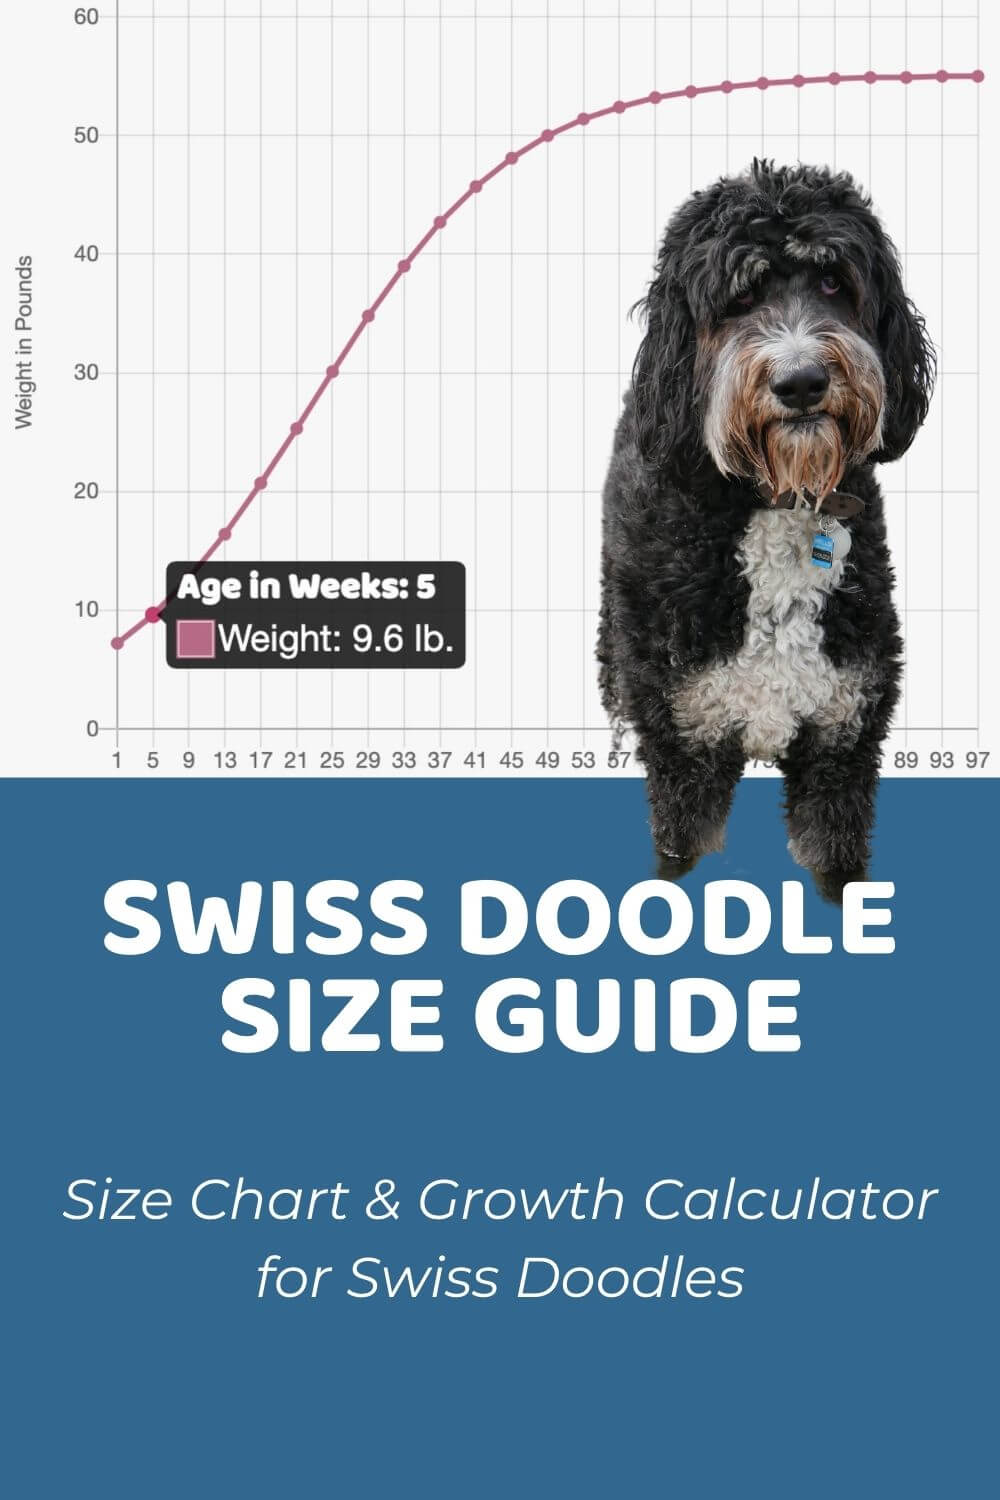 Swiss Doodle Size Guide Size Chart & Growth Calculator